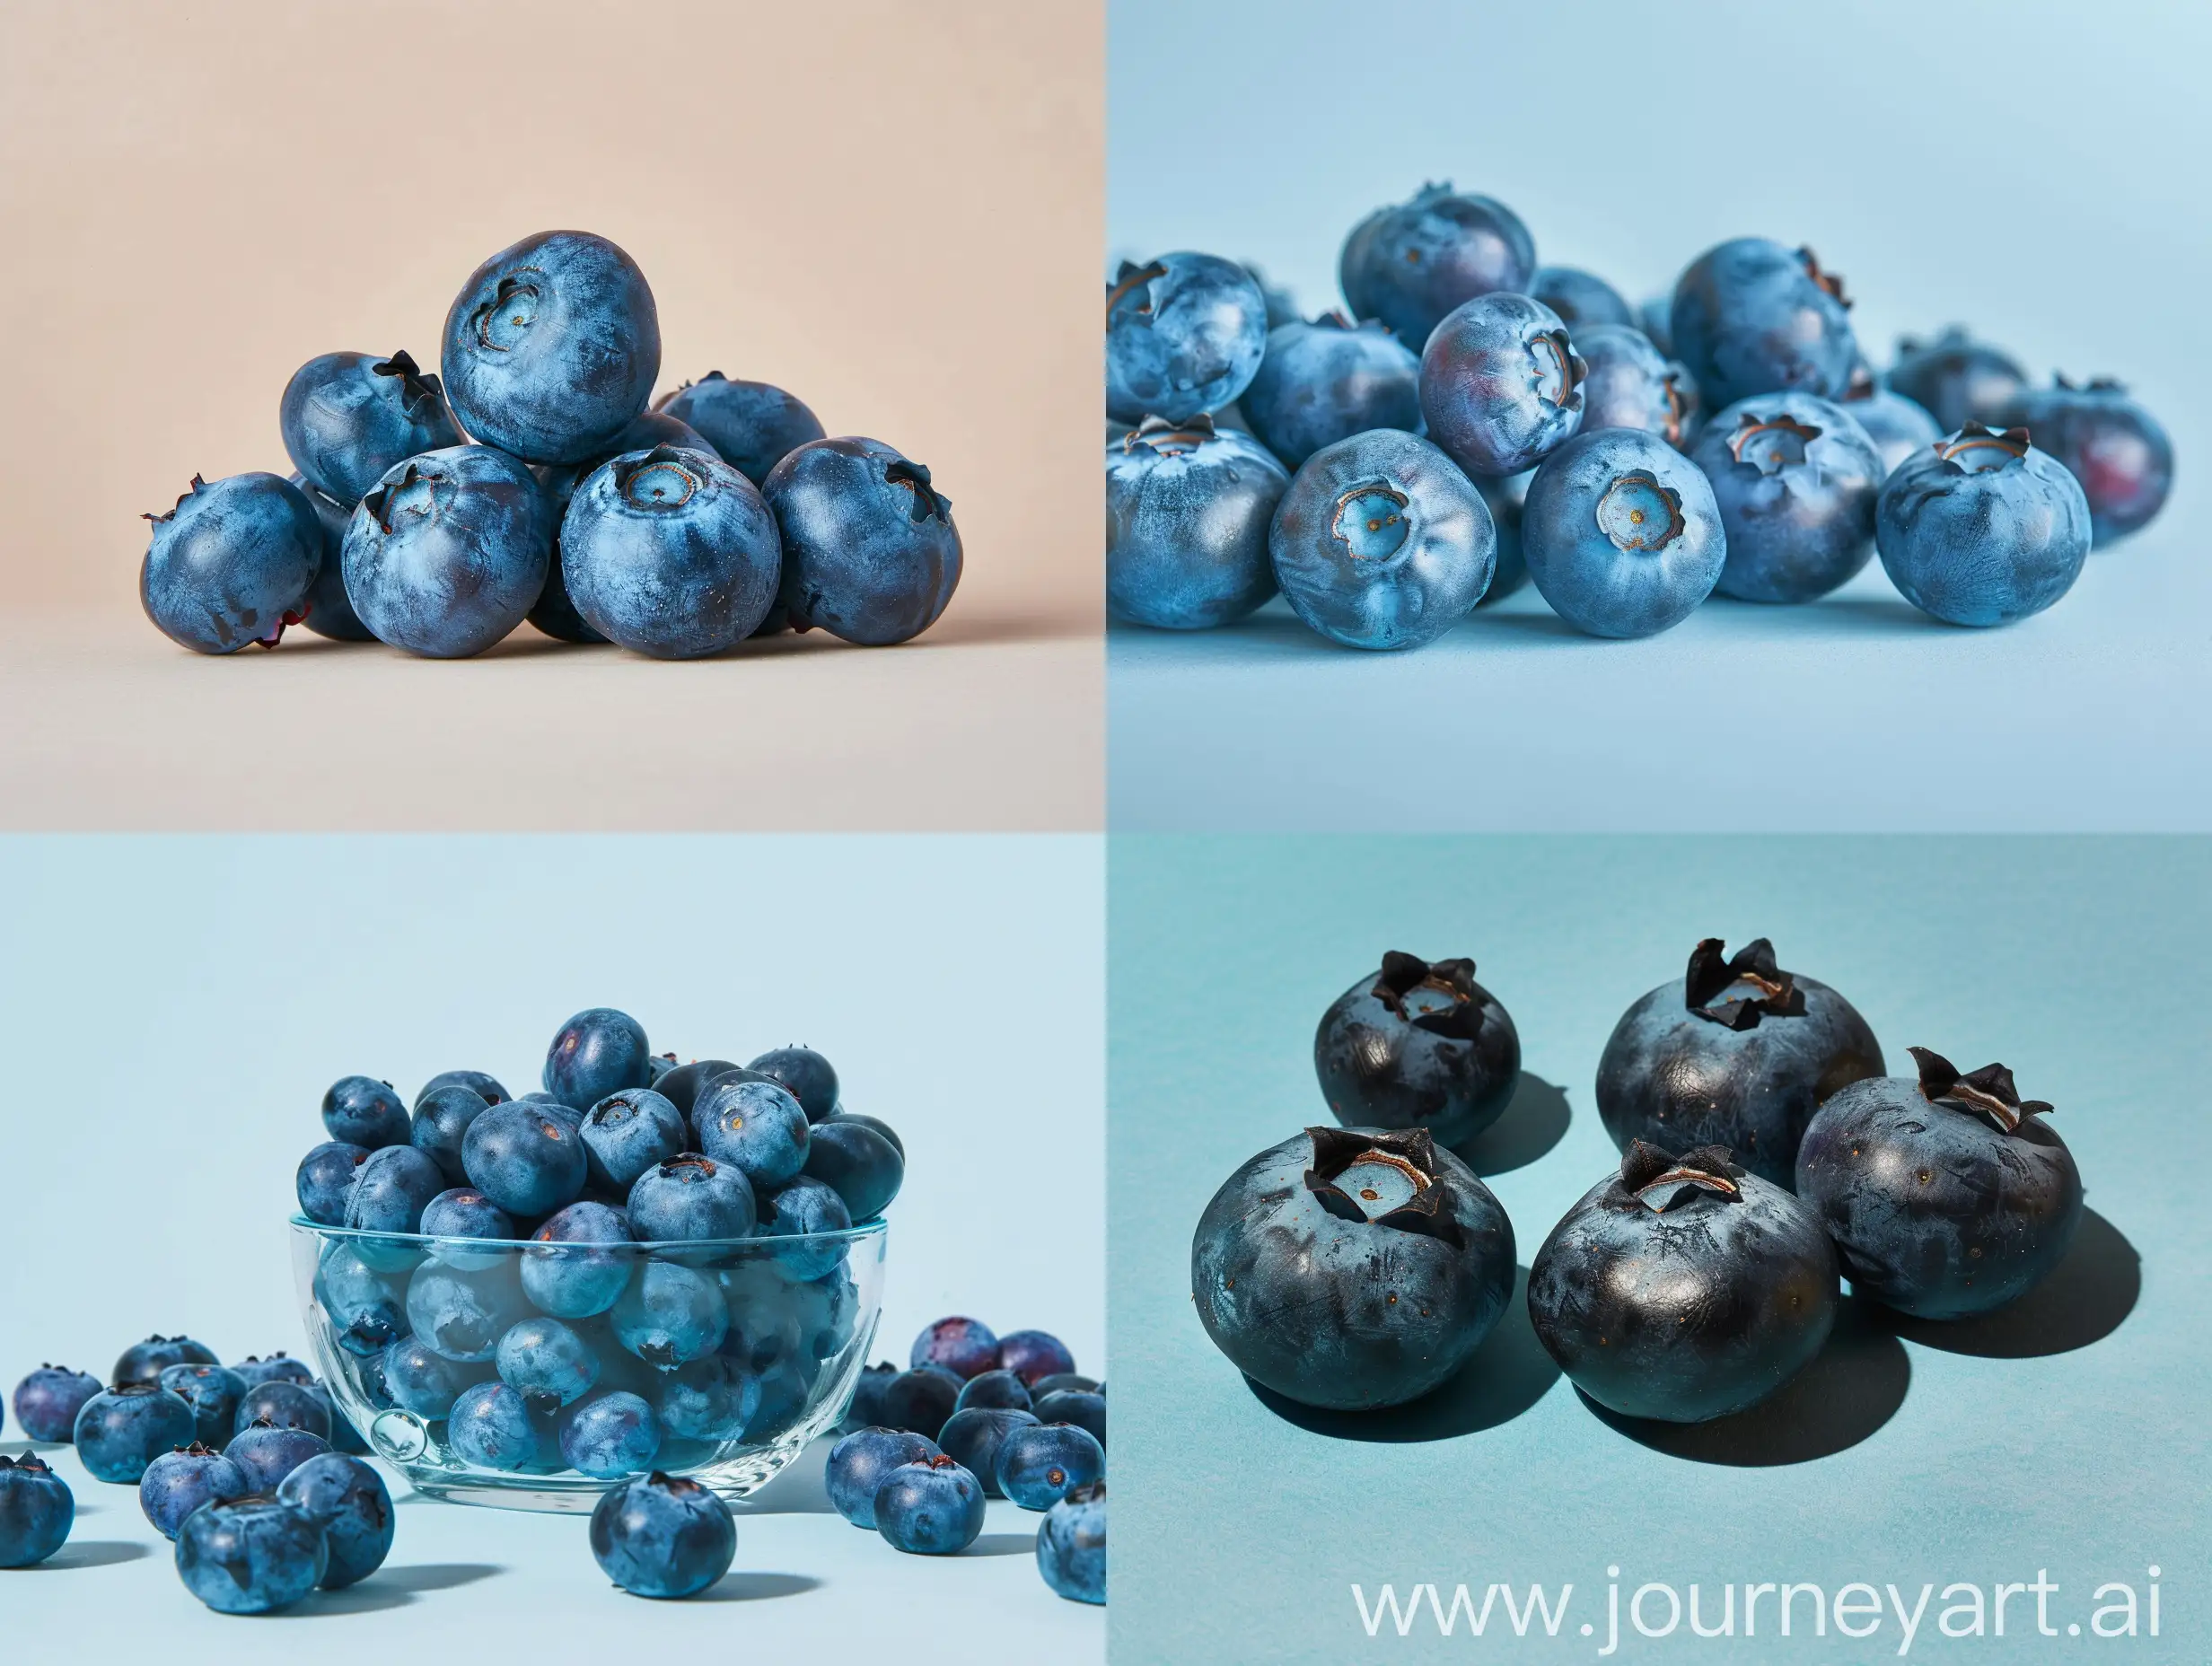 Studio shot of blueberries with a single color background